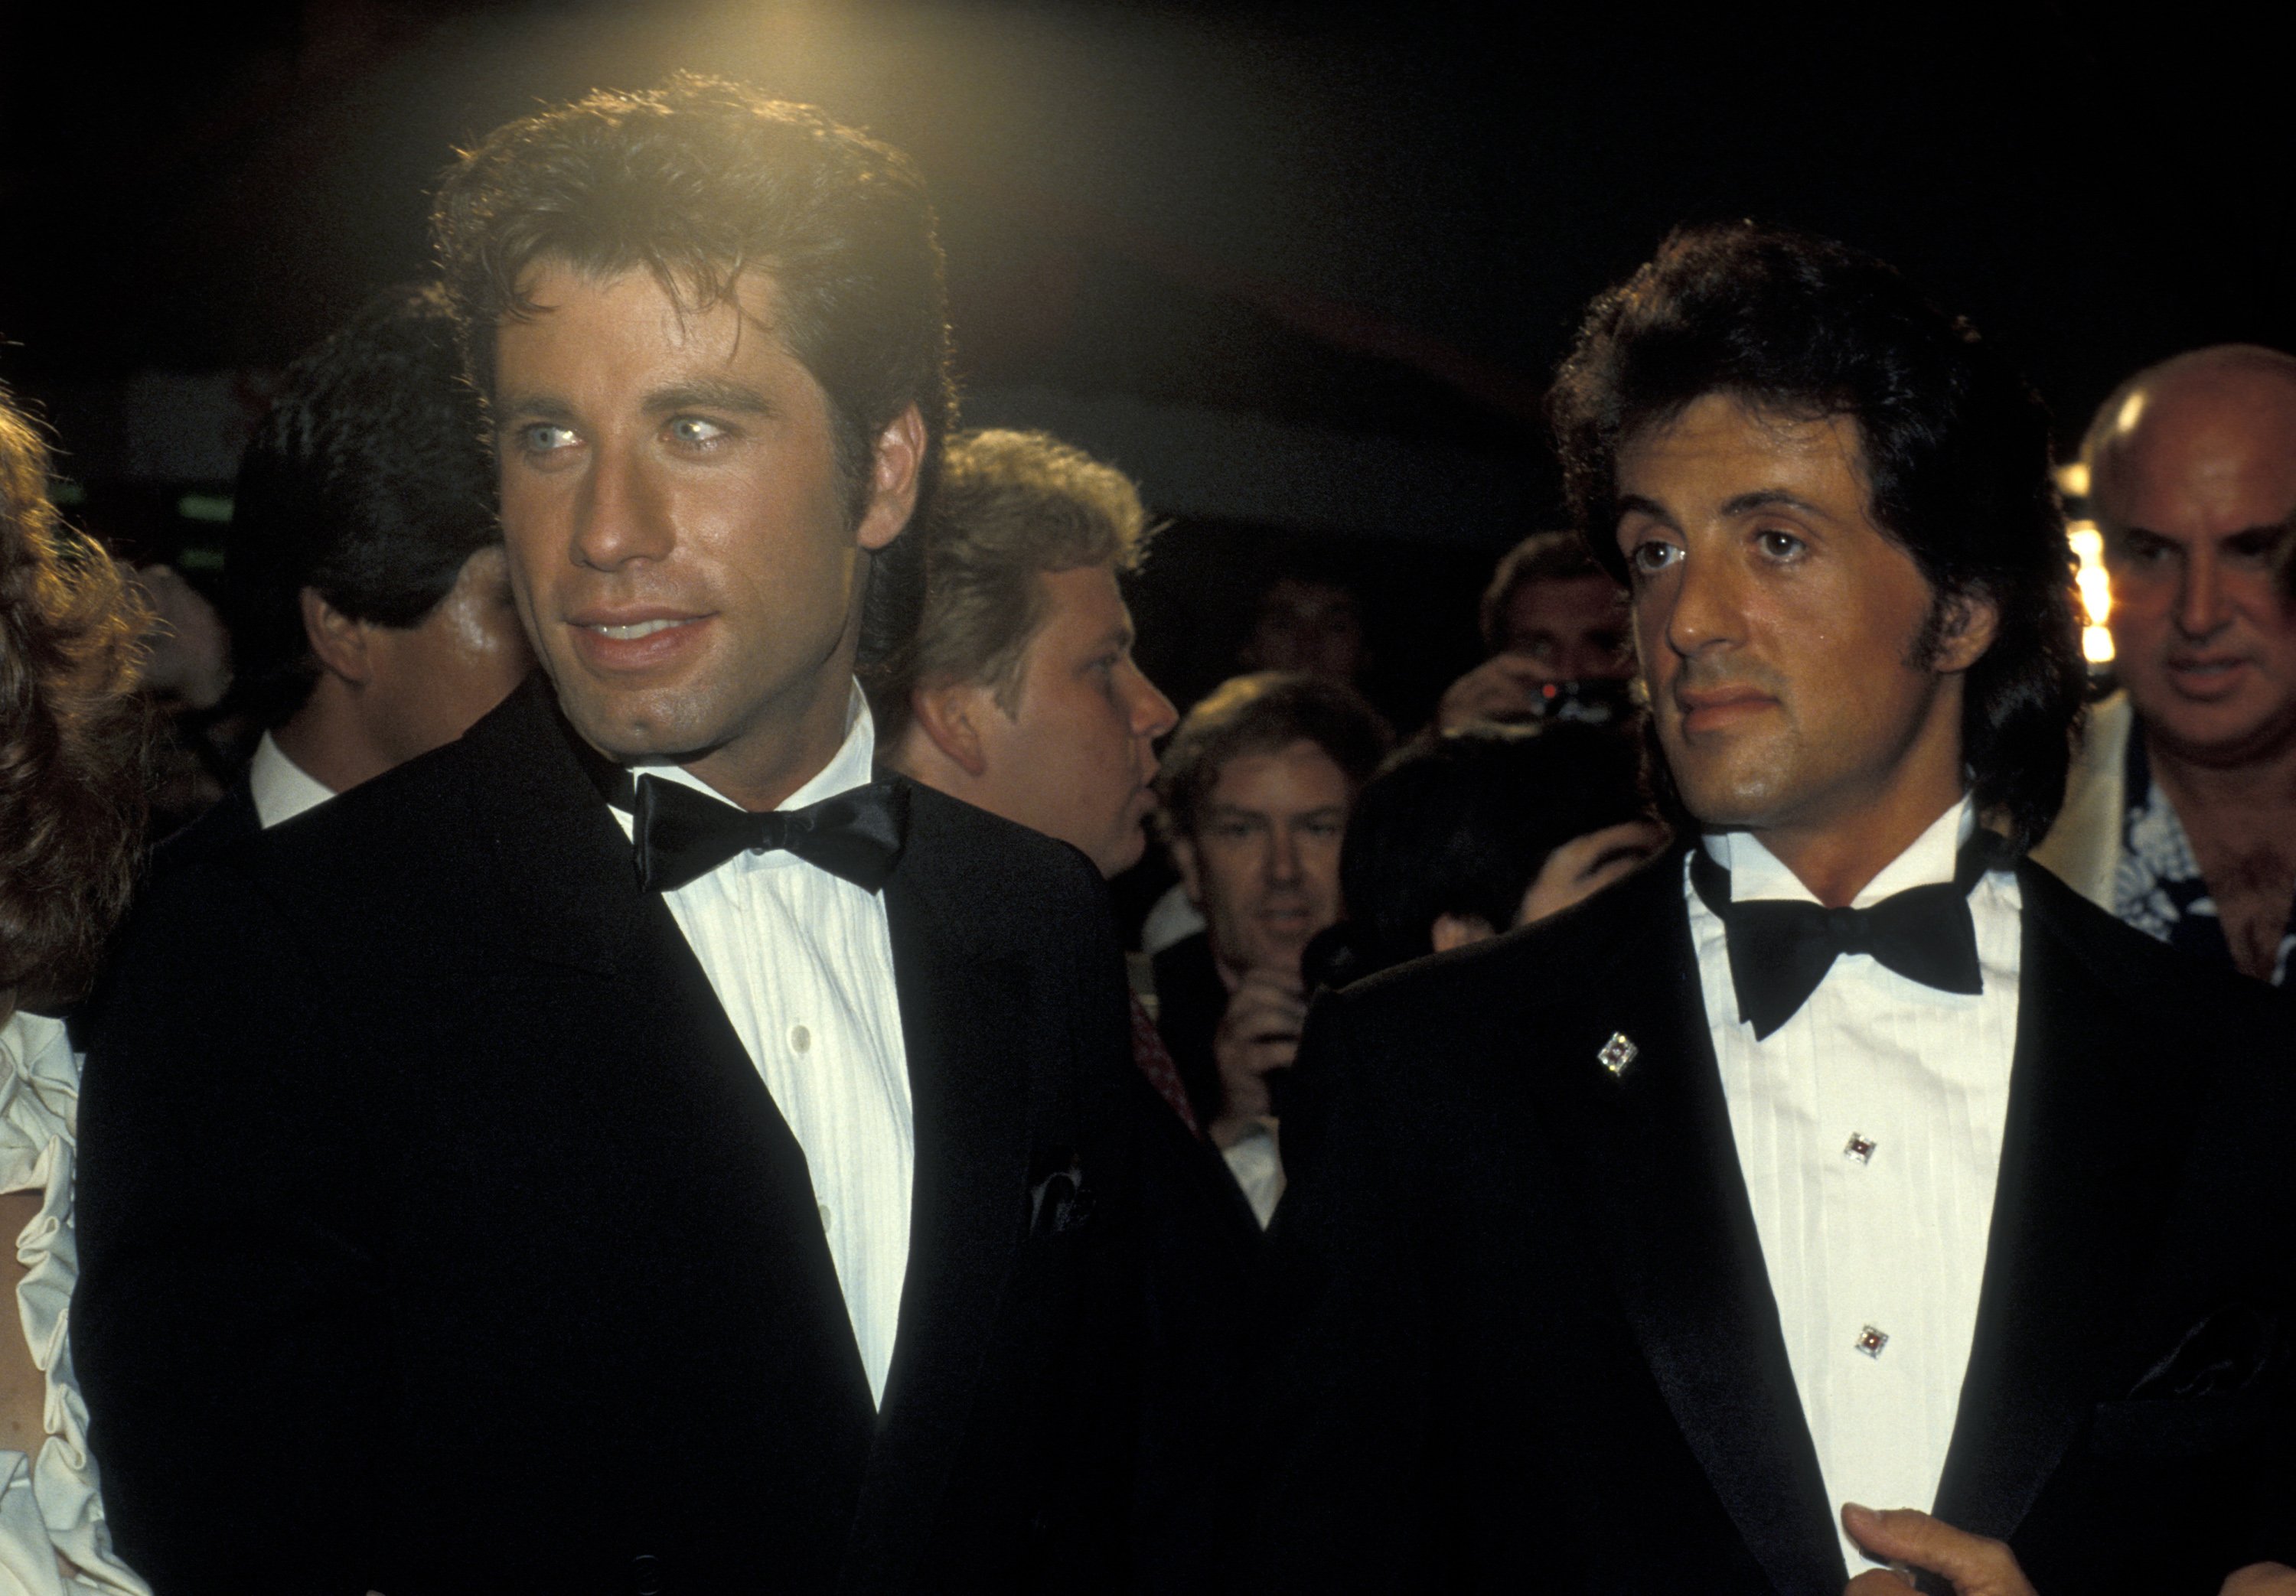 John Travolta and Sylvester Stallone in suits